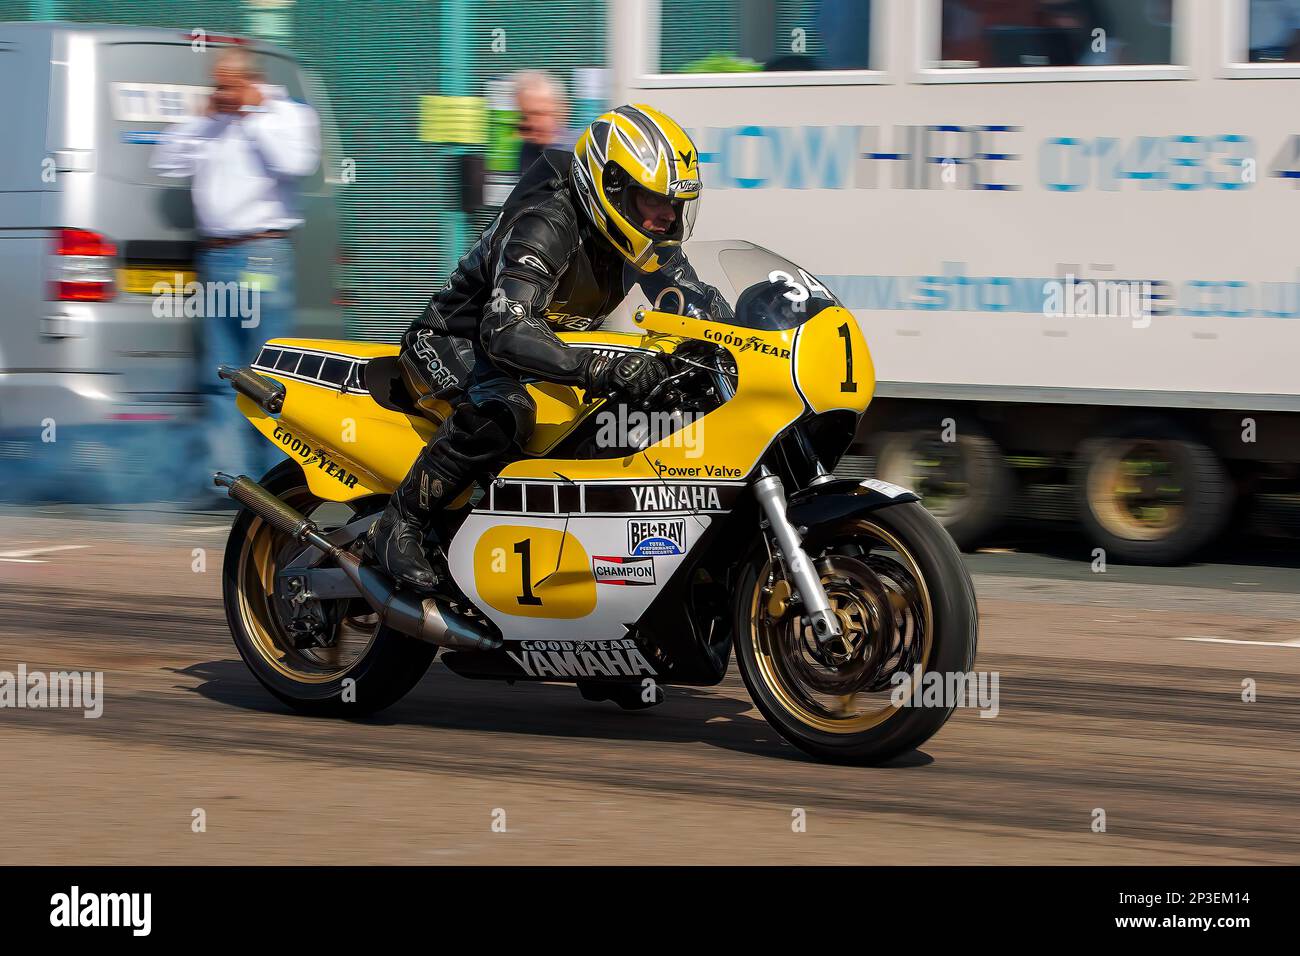 The event is currently run as a quarter mile sprint for both cars and motorcycles, held under the auspices of the Motor Sports Association. This image features Josh Lindsey riding a Yamaha RD500. The event is organised by the Brighton and Hove Motor Club run along Madeira Drive, Brighton Sea Front, City of Brighton & Hove, UK. 2nd September 2017 Stock Photo